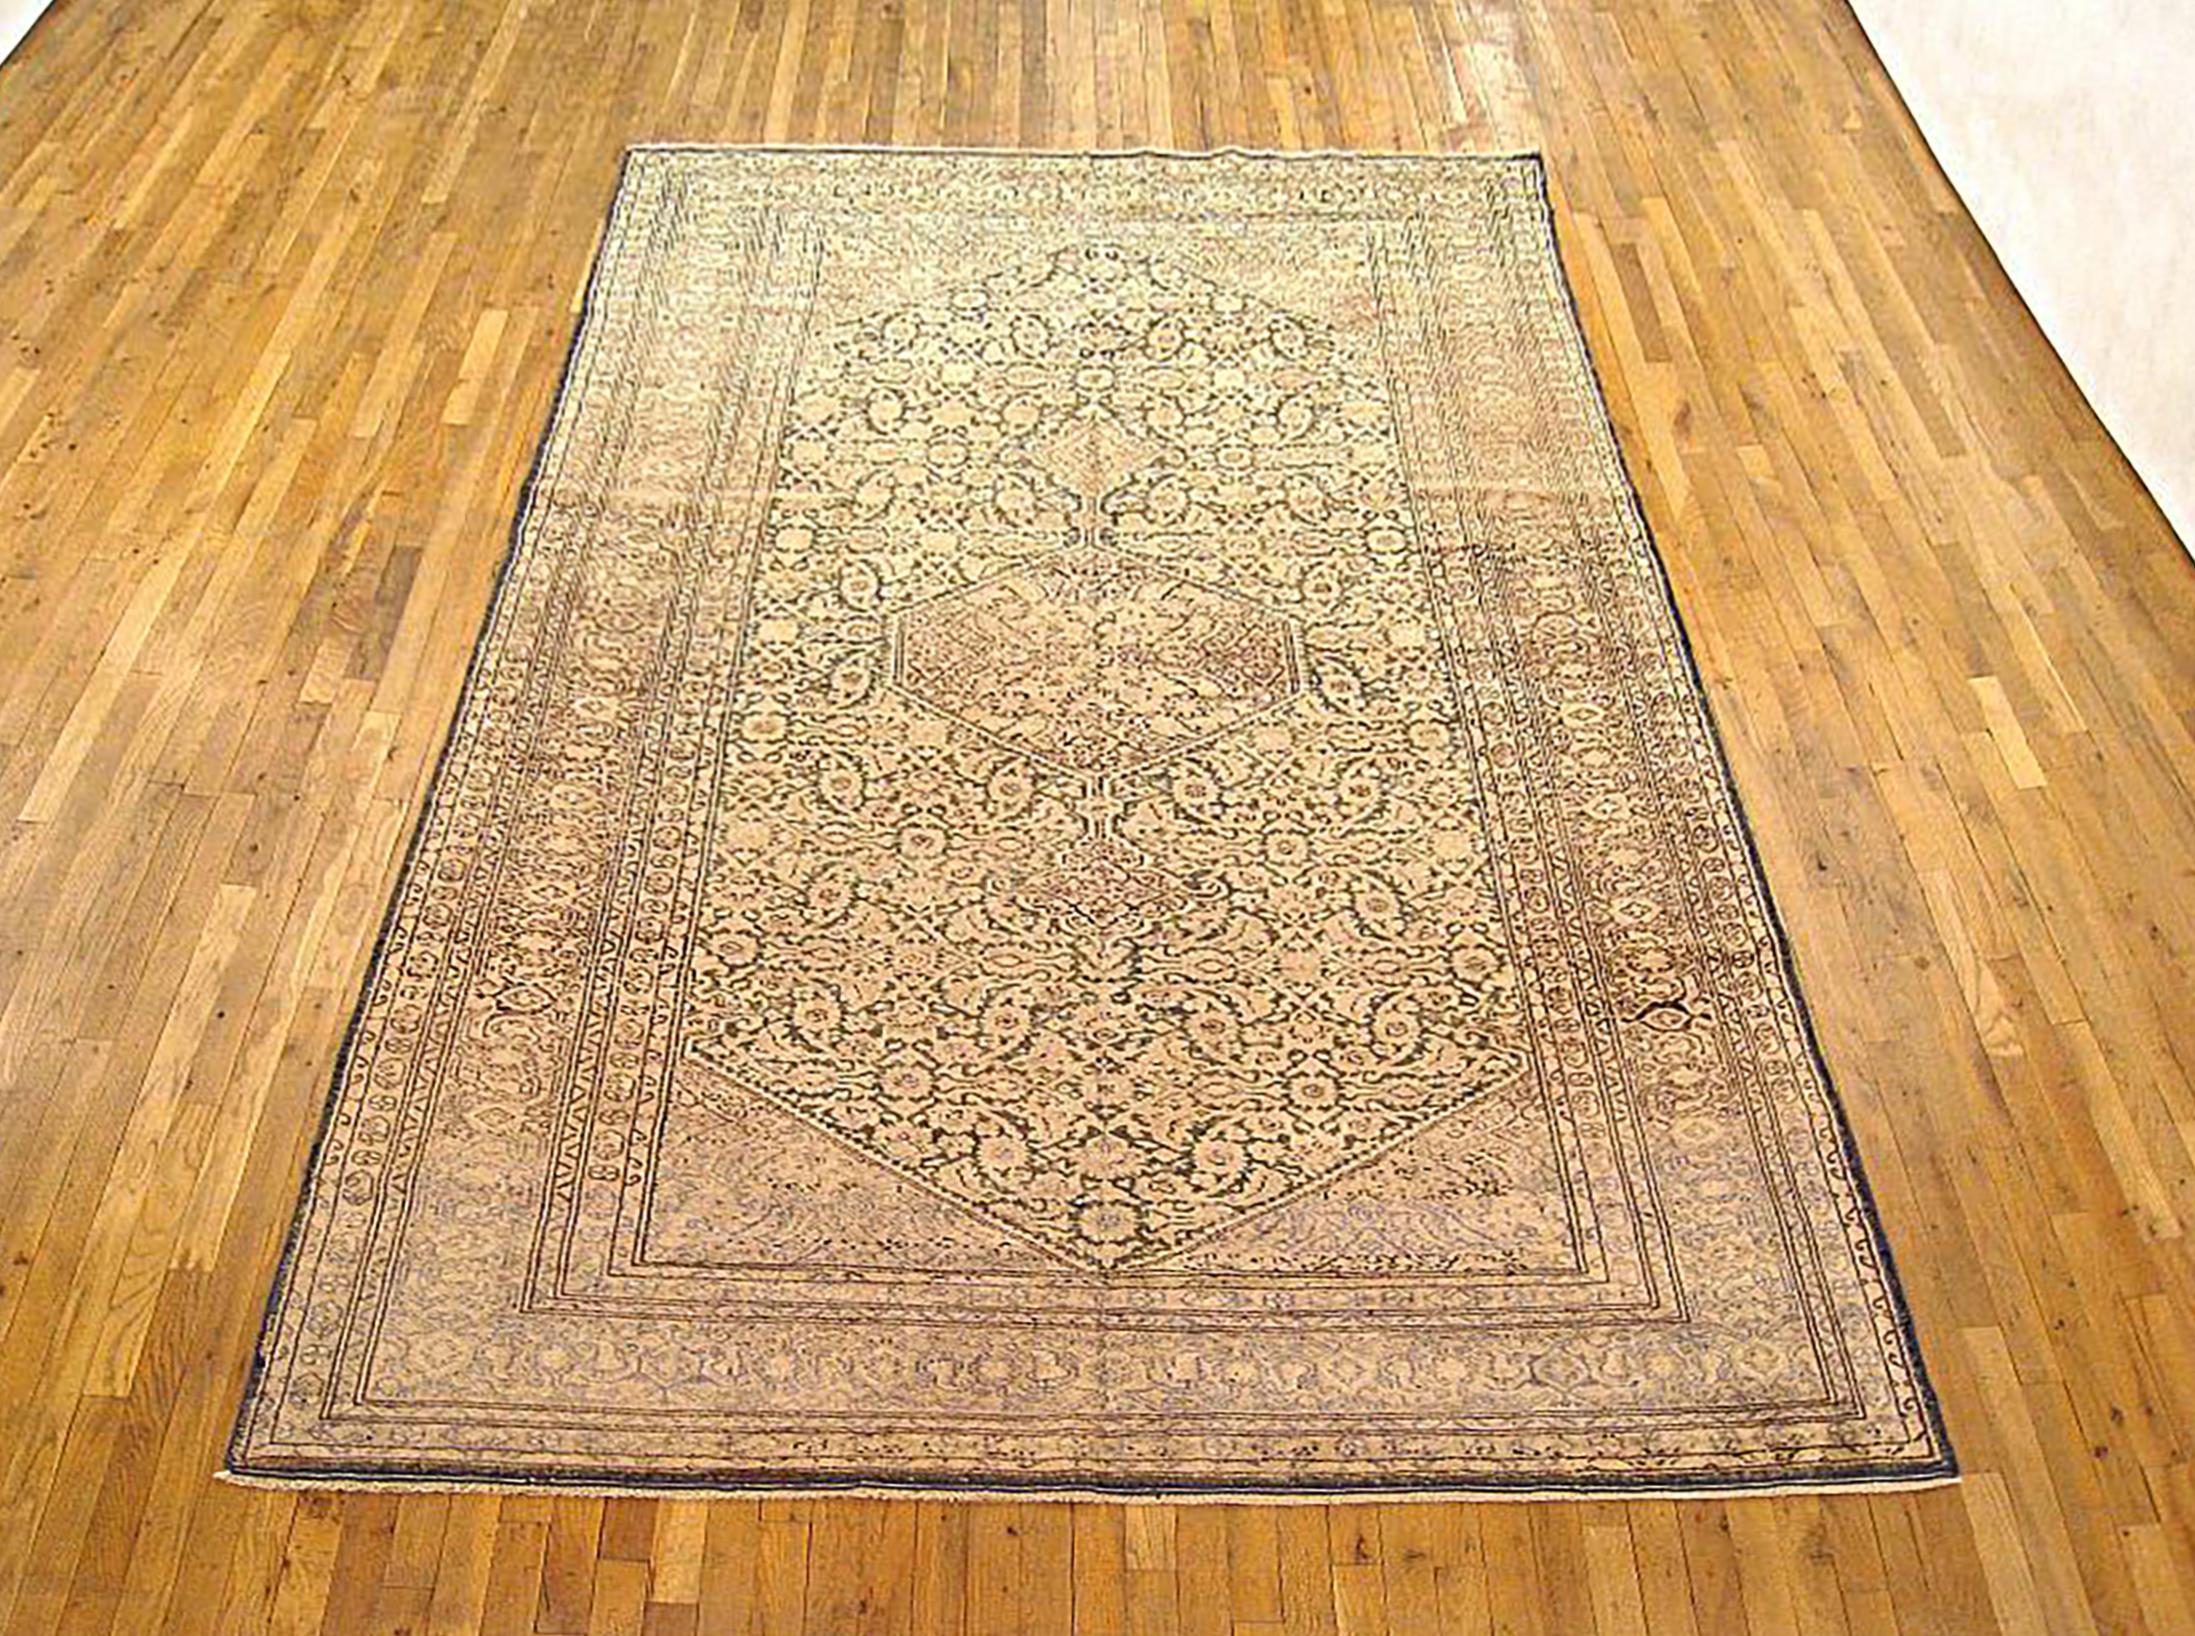 Antique Persian Malayer Oriental Rug in Room Size

An antique Persian Malayer oriental rug, circa 1920. Size 11'1